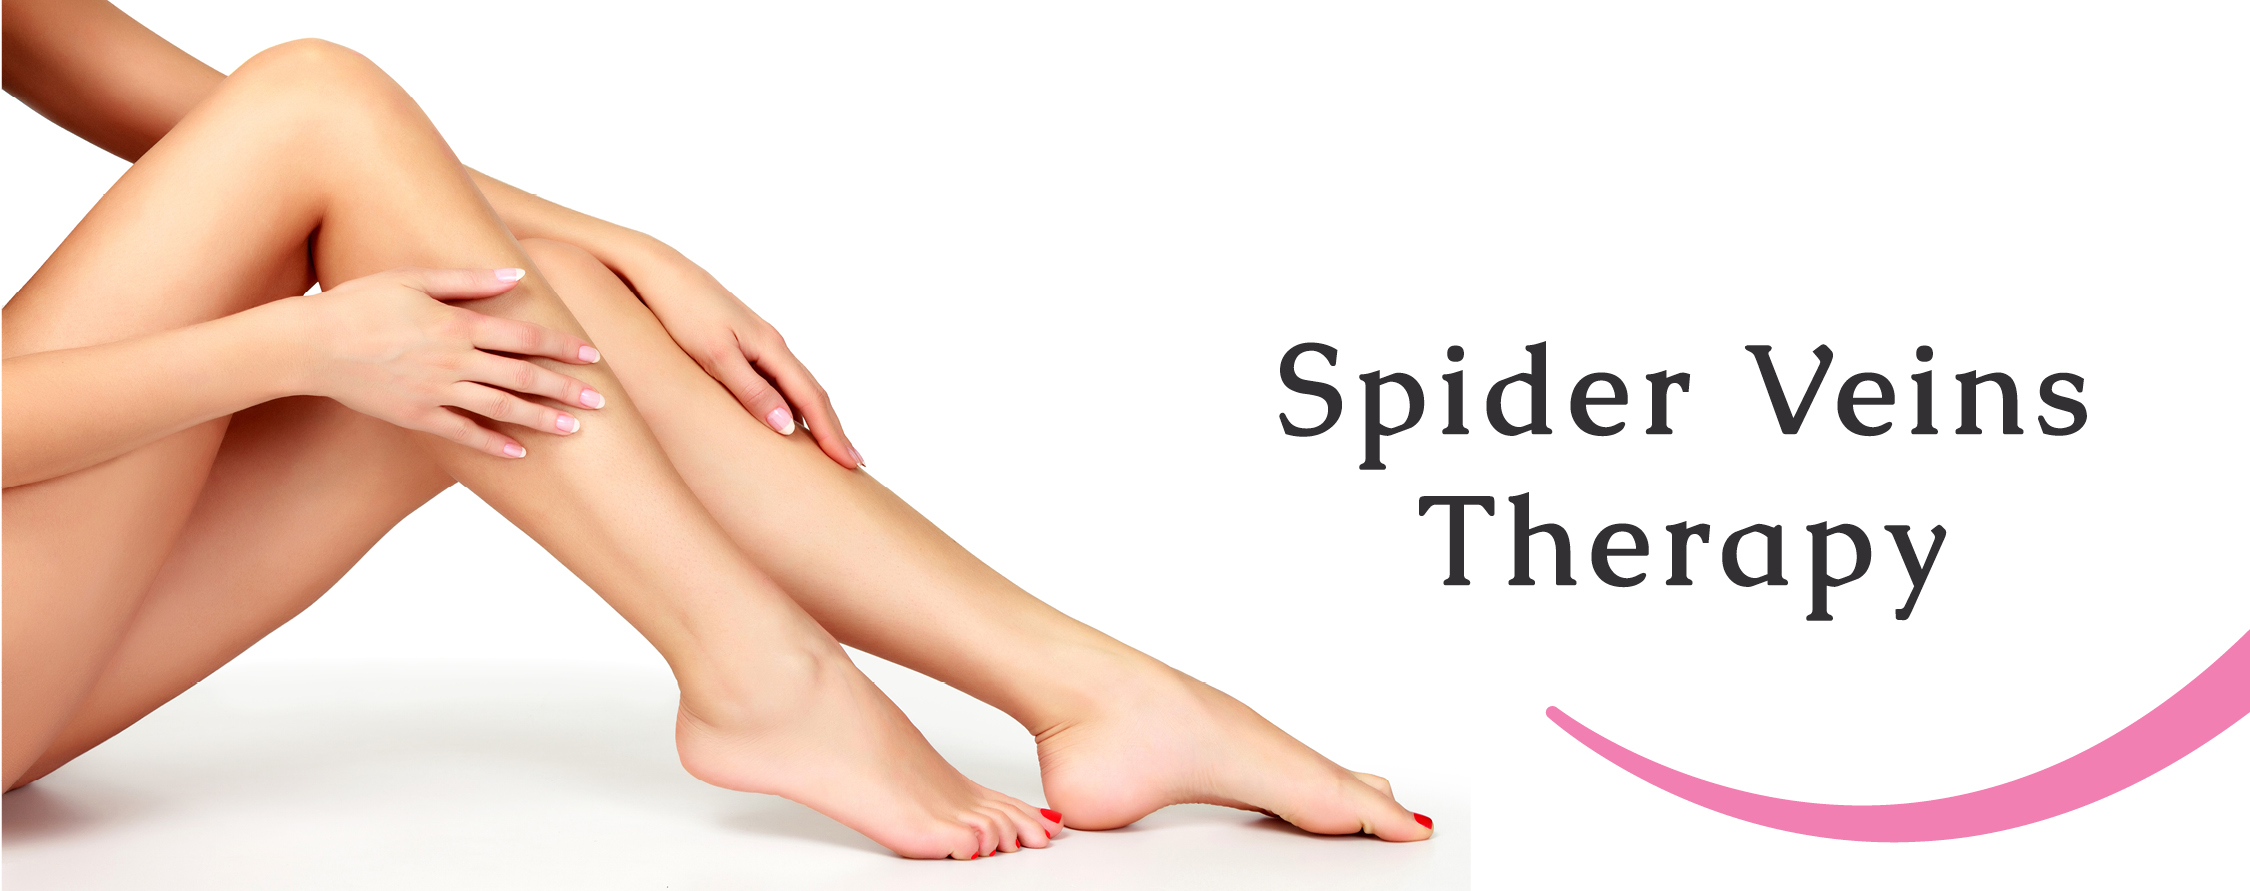 Spider Veins Therapy